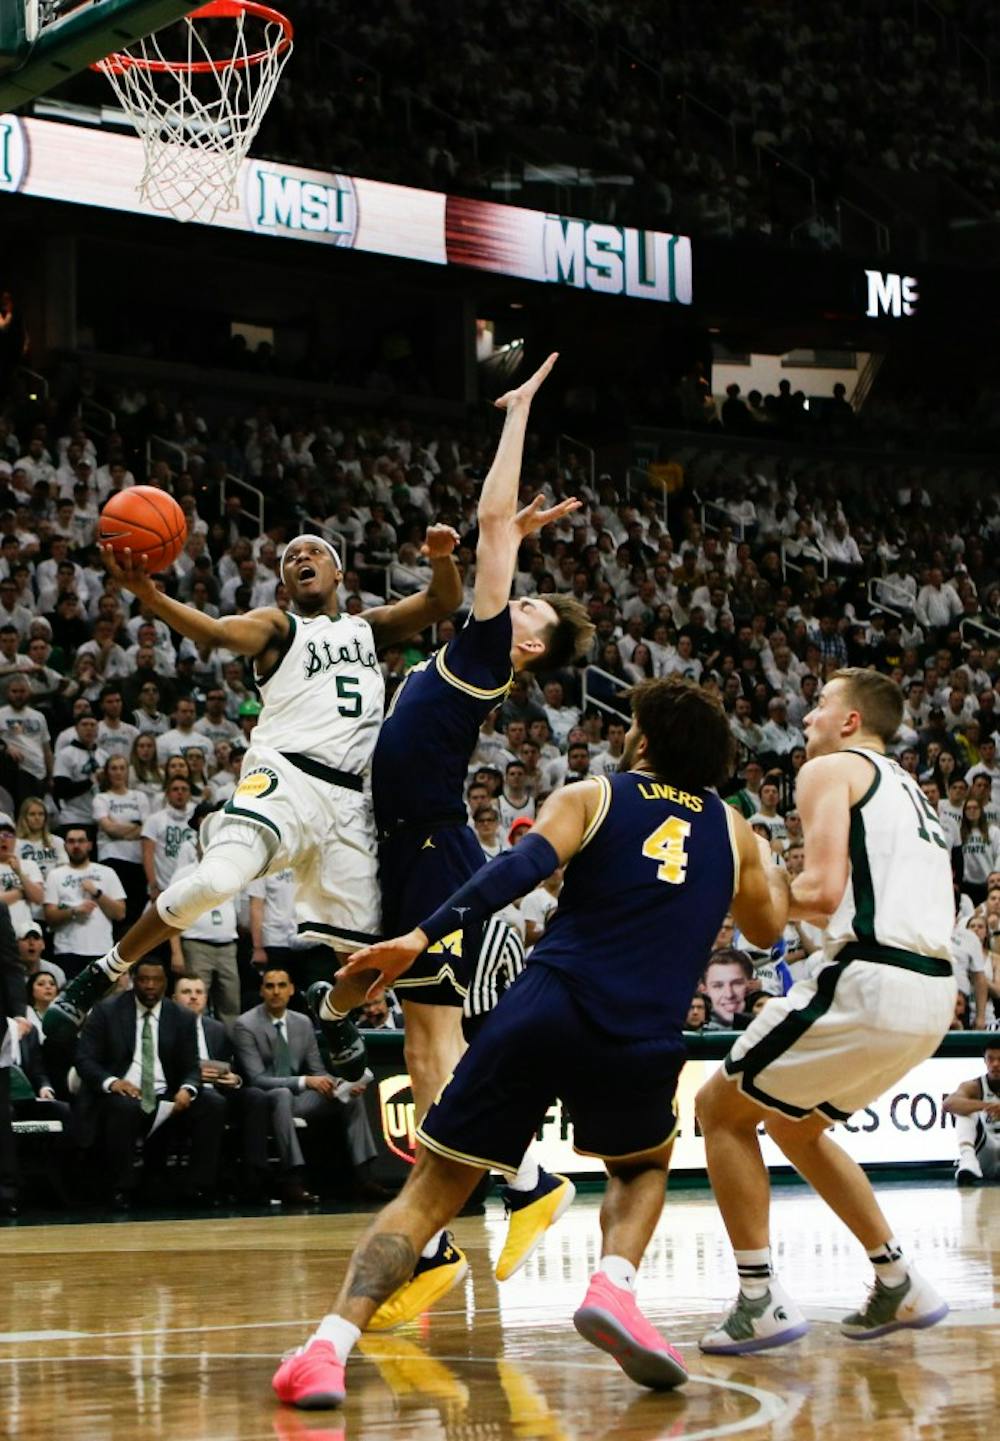 Junior guard Cassius Winston (5) makes a layup during the game against Michigan at Breslin Center March 9, 2019. The Spartans defeated the Wolverines, 75-63.